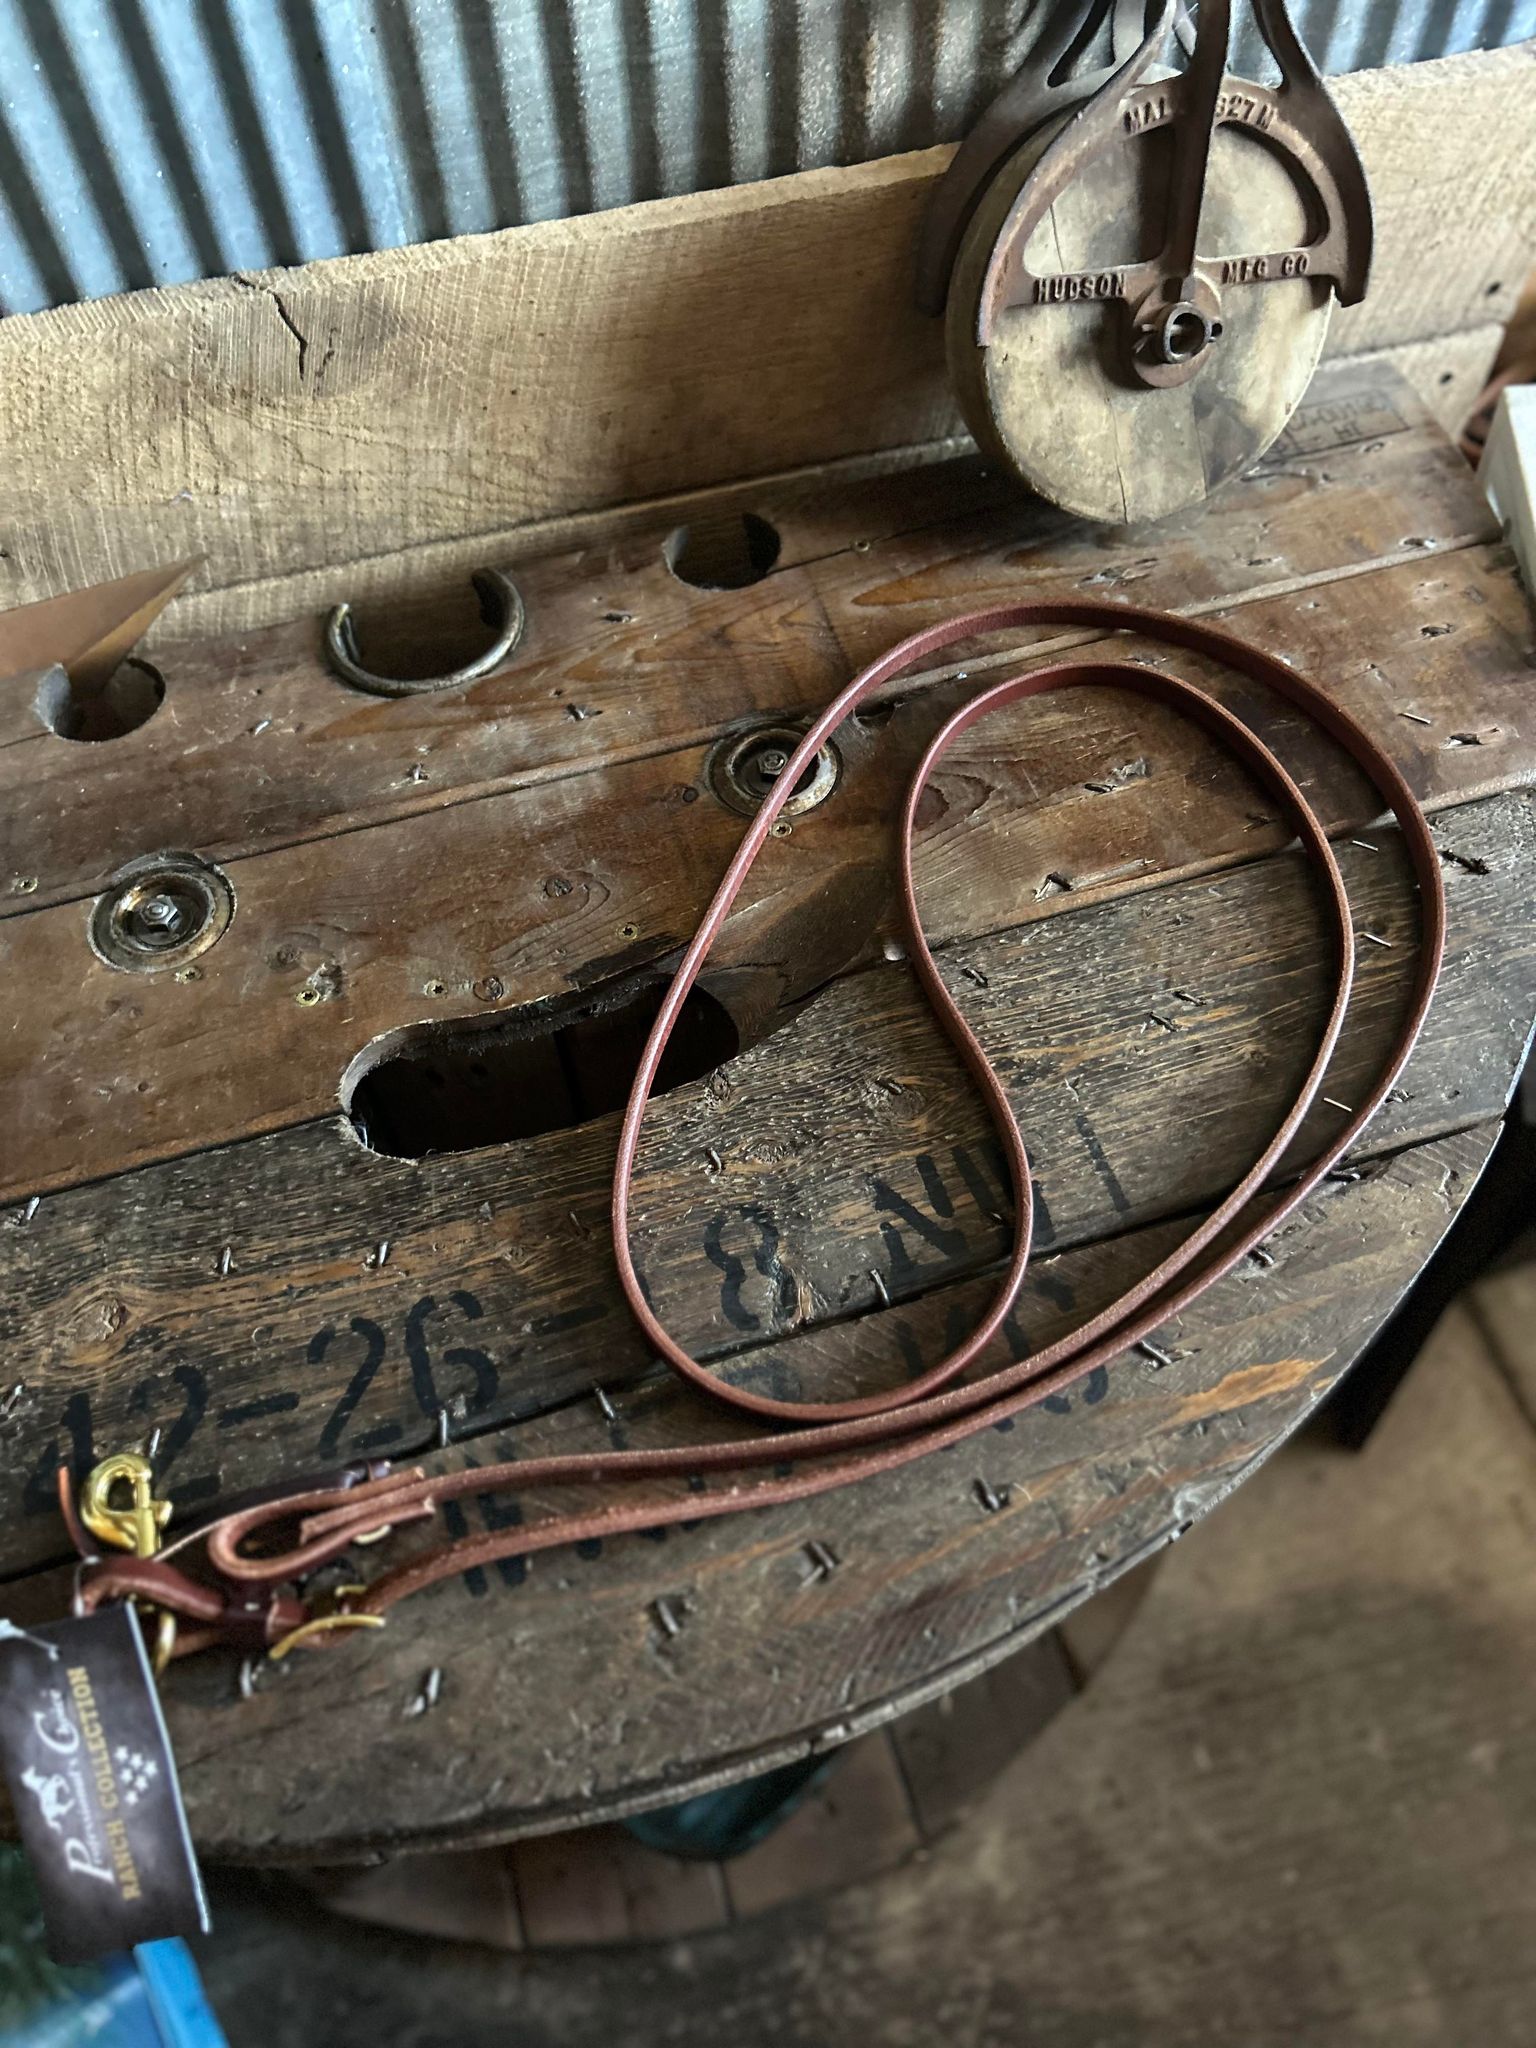 1/2in Roping Reins RH7090HO-Roping Reins-Professionals Choice-Lucky J Boots & More, Women's, Men's, & Kids Western Store Located in Carthage, MO